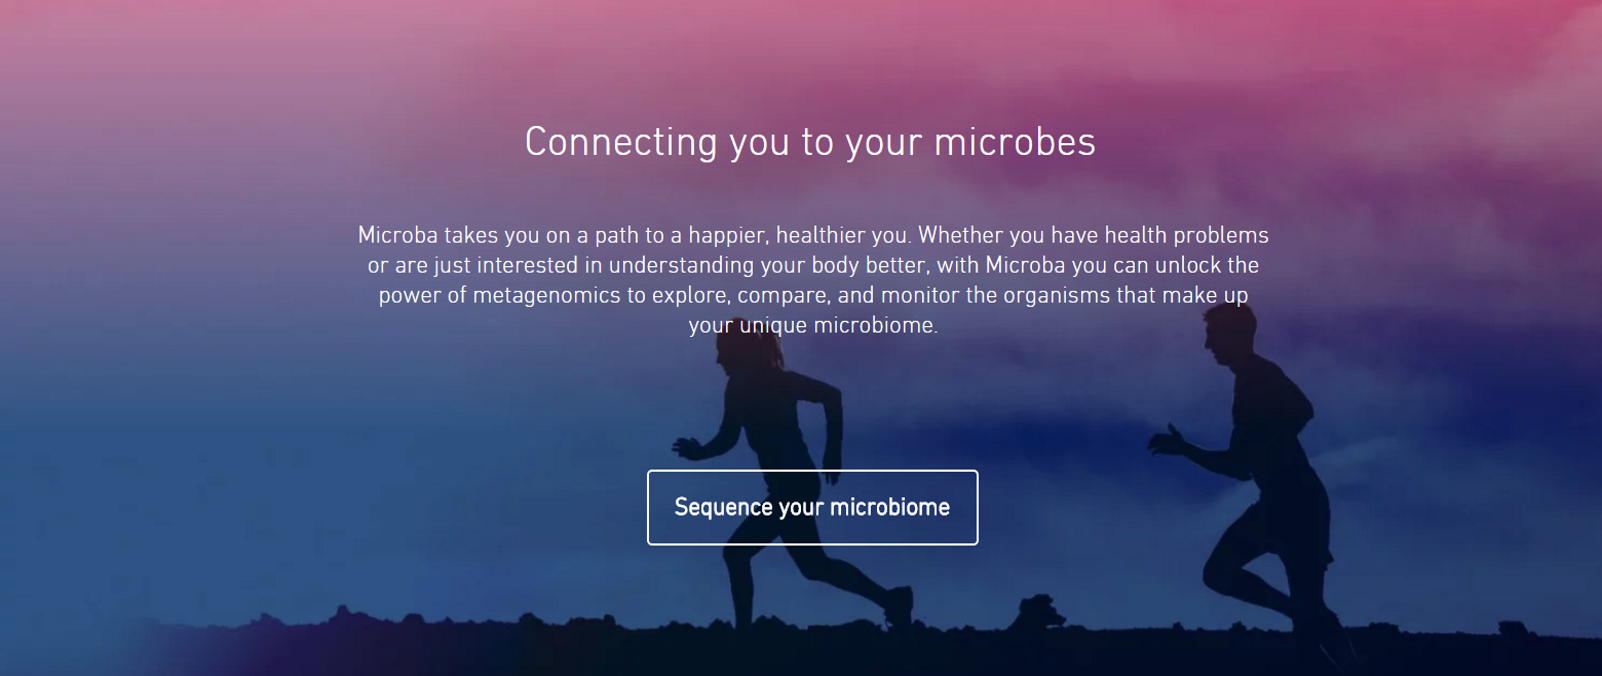 microba_connecting you to your microbes